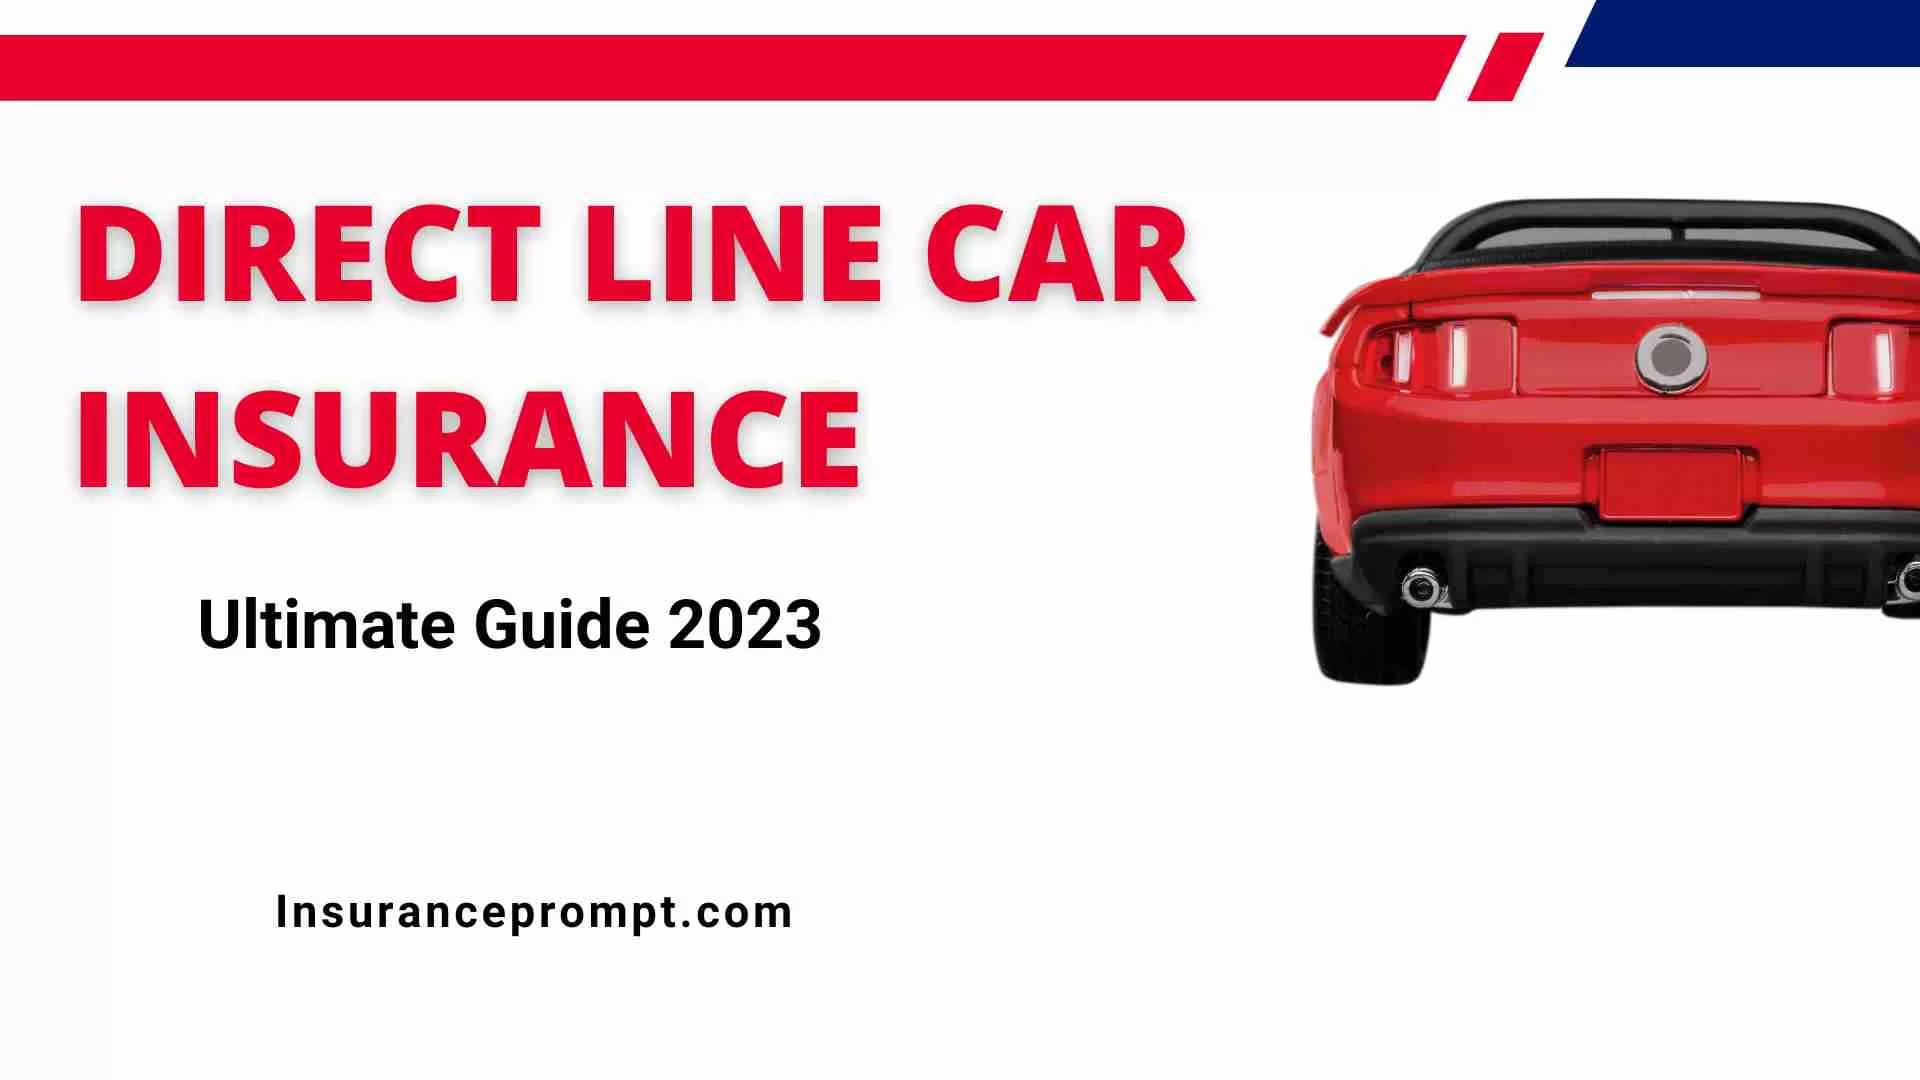 Direct Line Car Insurance: Ultimate Guide 2023